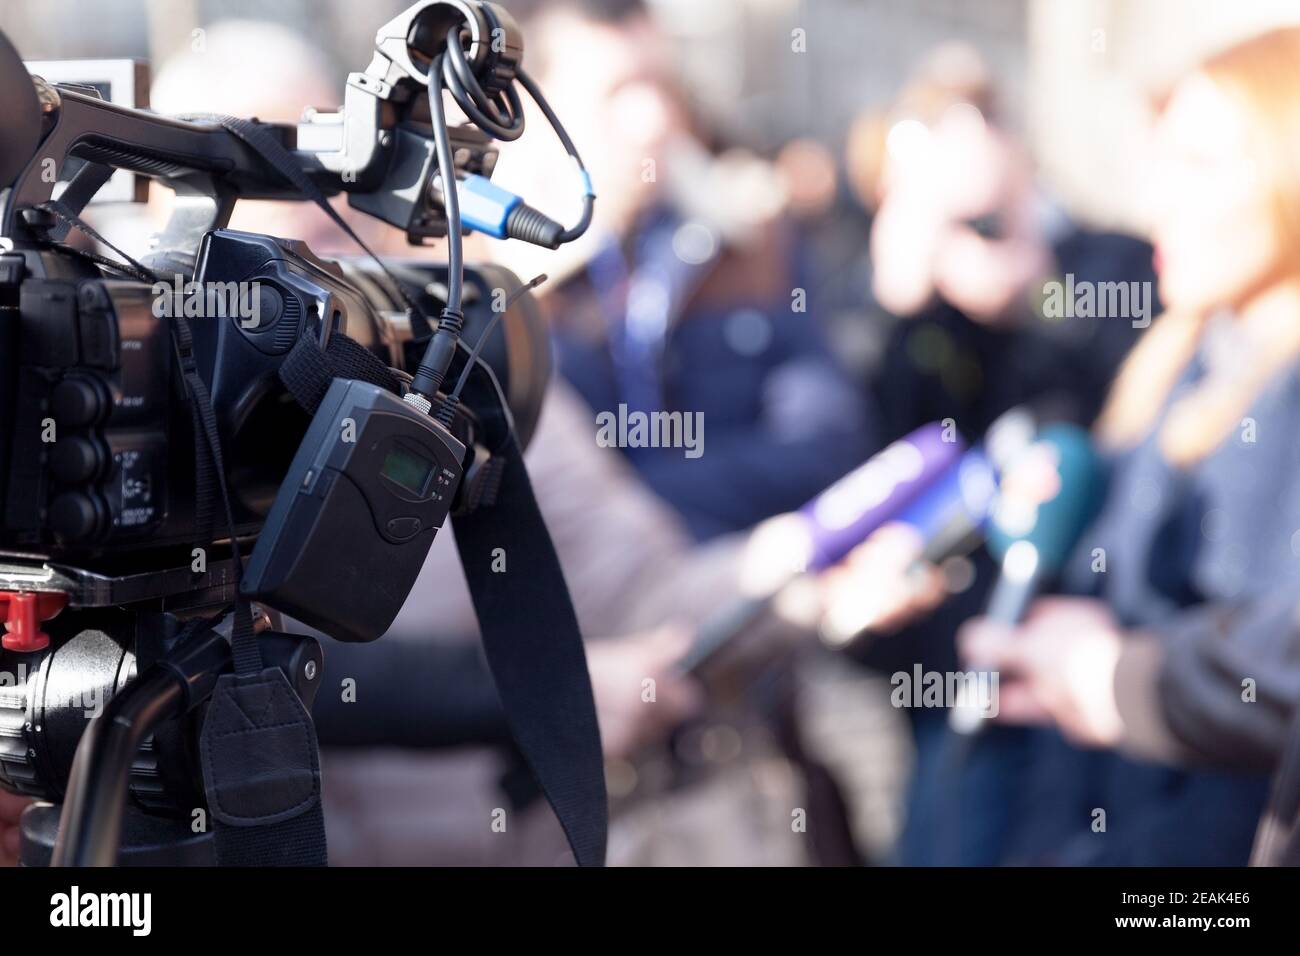 Filming media event with a video camera Stock Photo